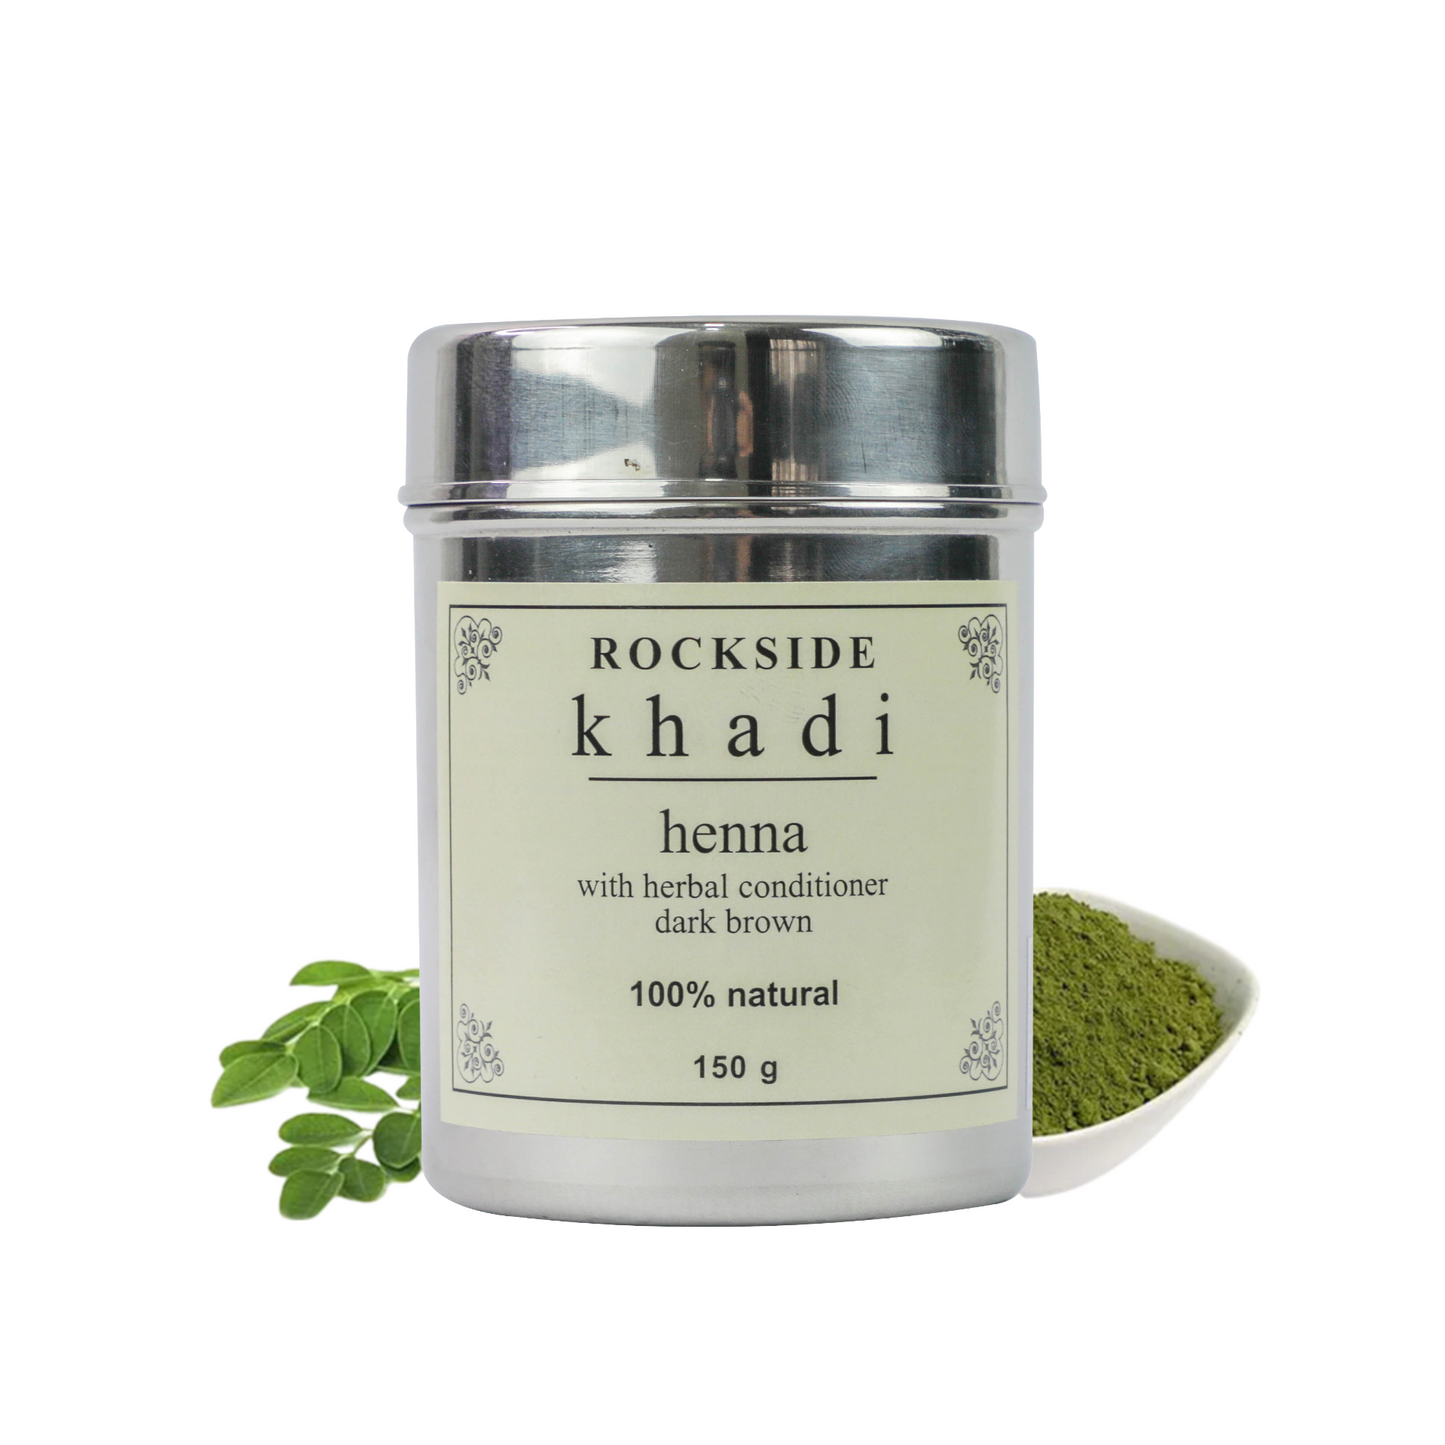 K h a d i Heena with Herbal Conditioner